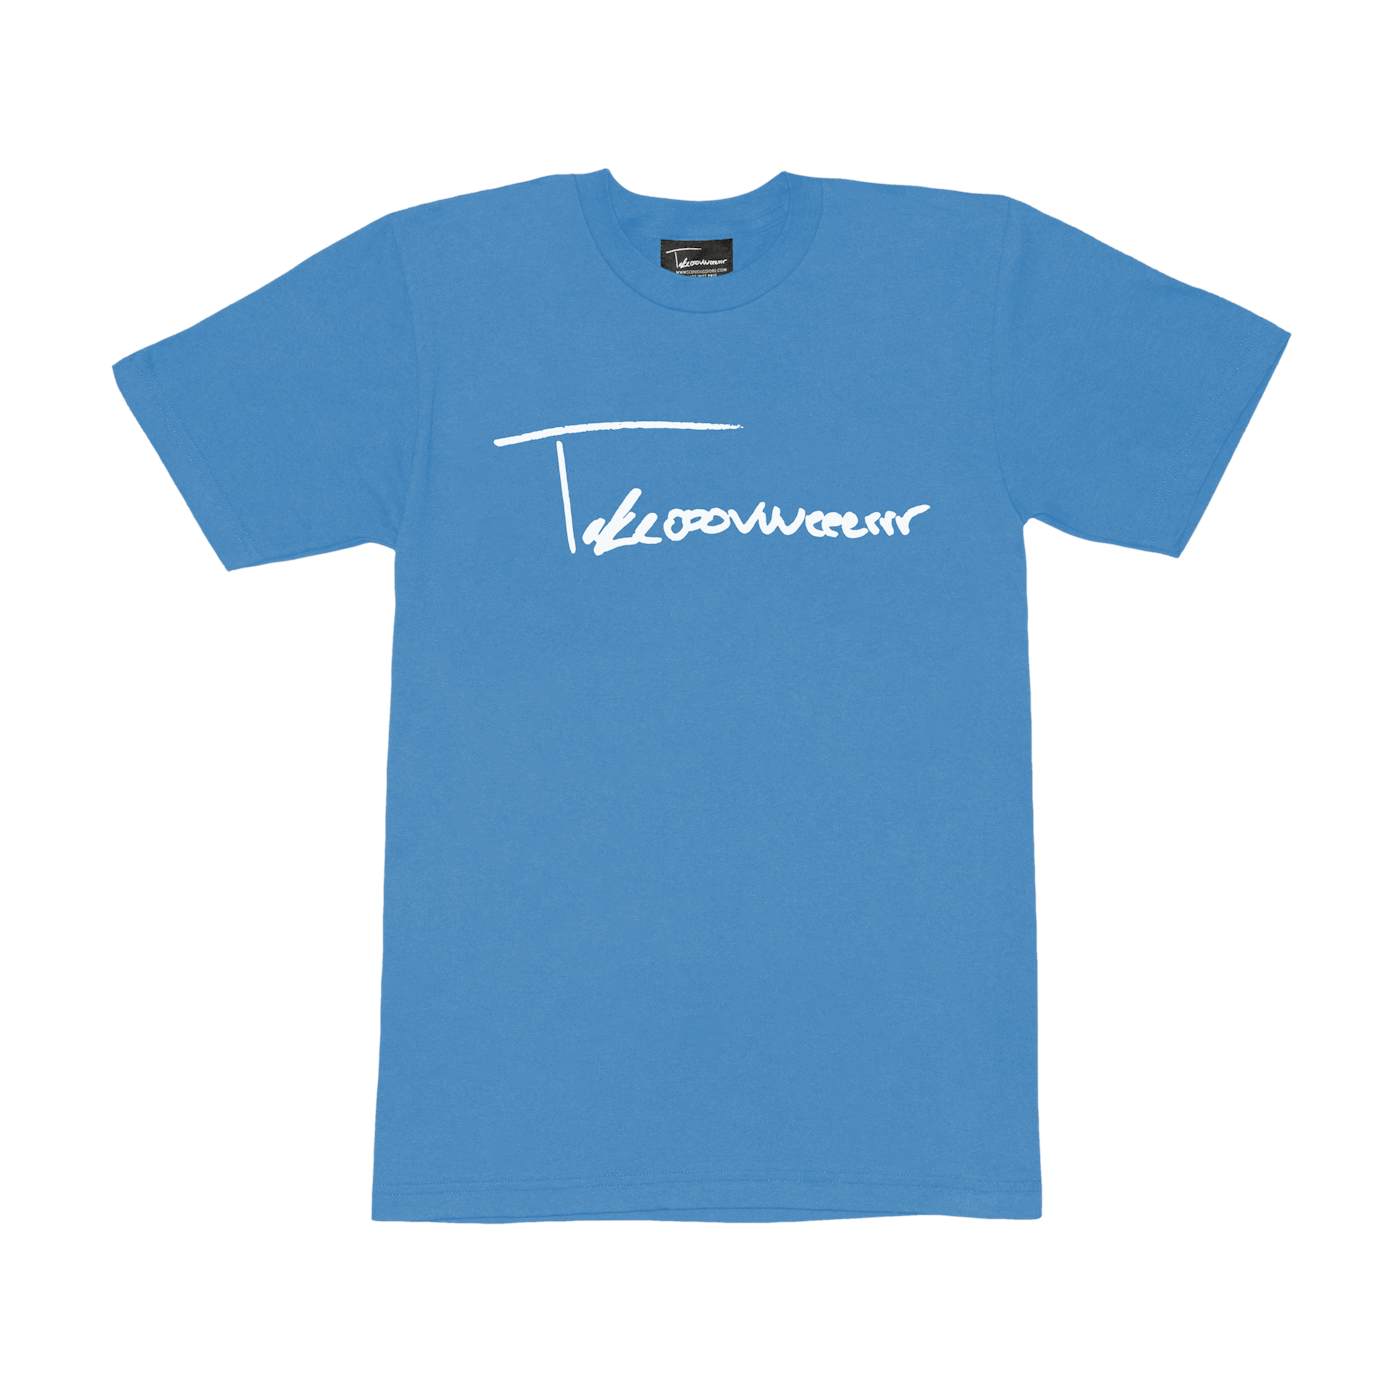 Taylor J Takeover Signature Tee (Baby Blue/White)